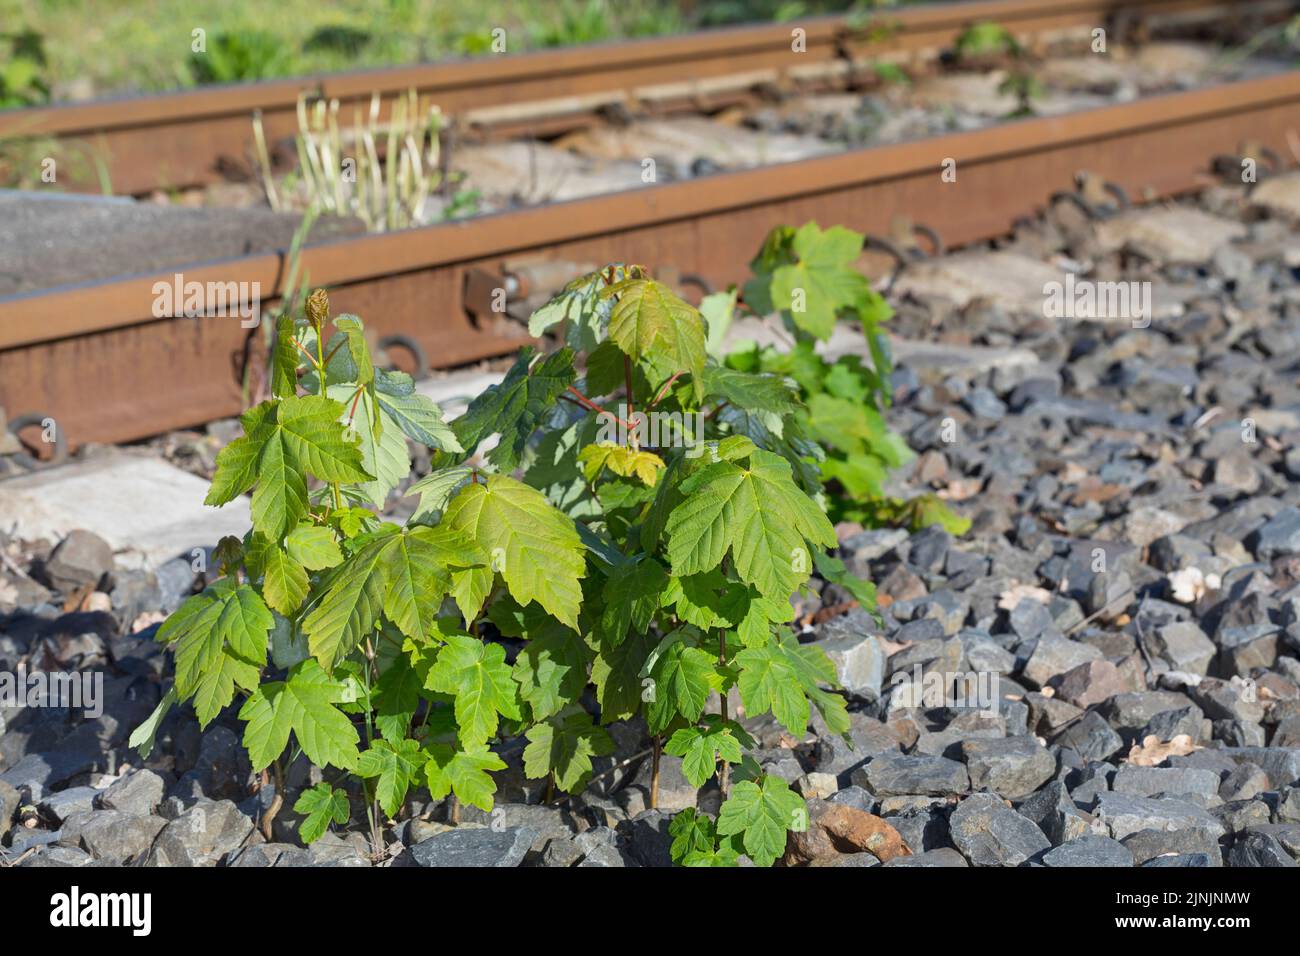 sycamore maple, great maple (Acer pseudoplatanus), in a track bed of the railway, Germany Stock Photo